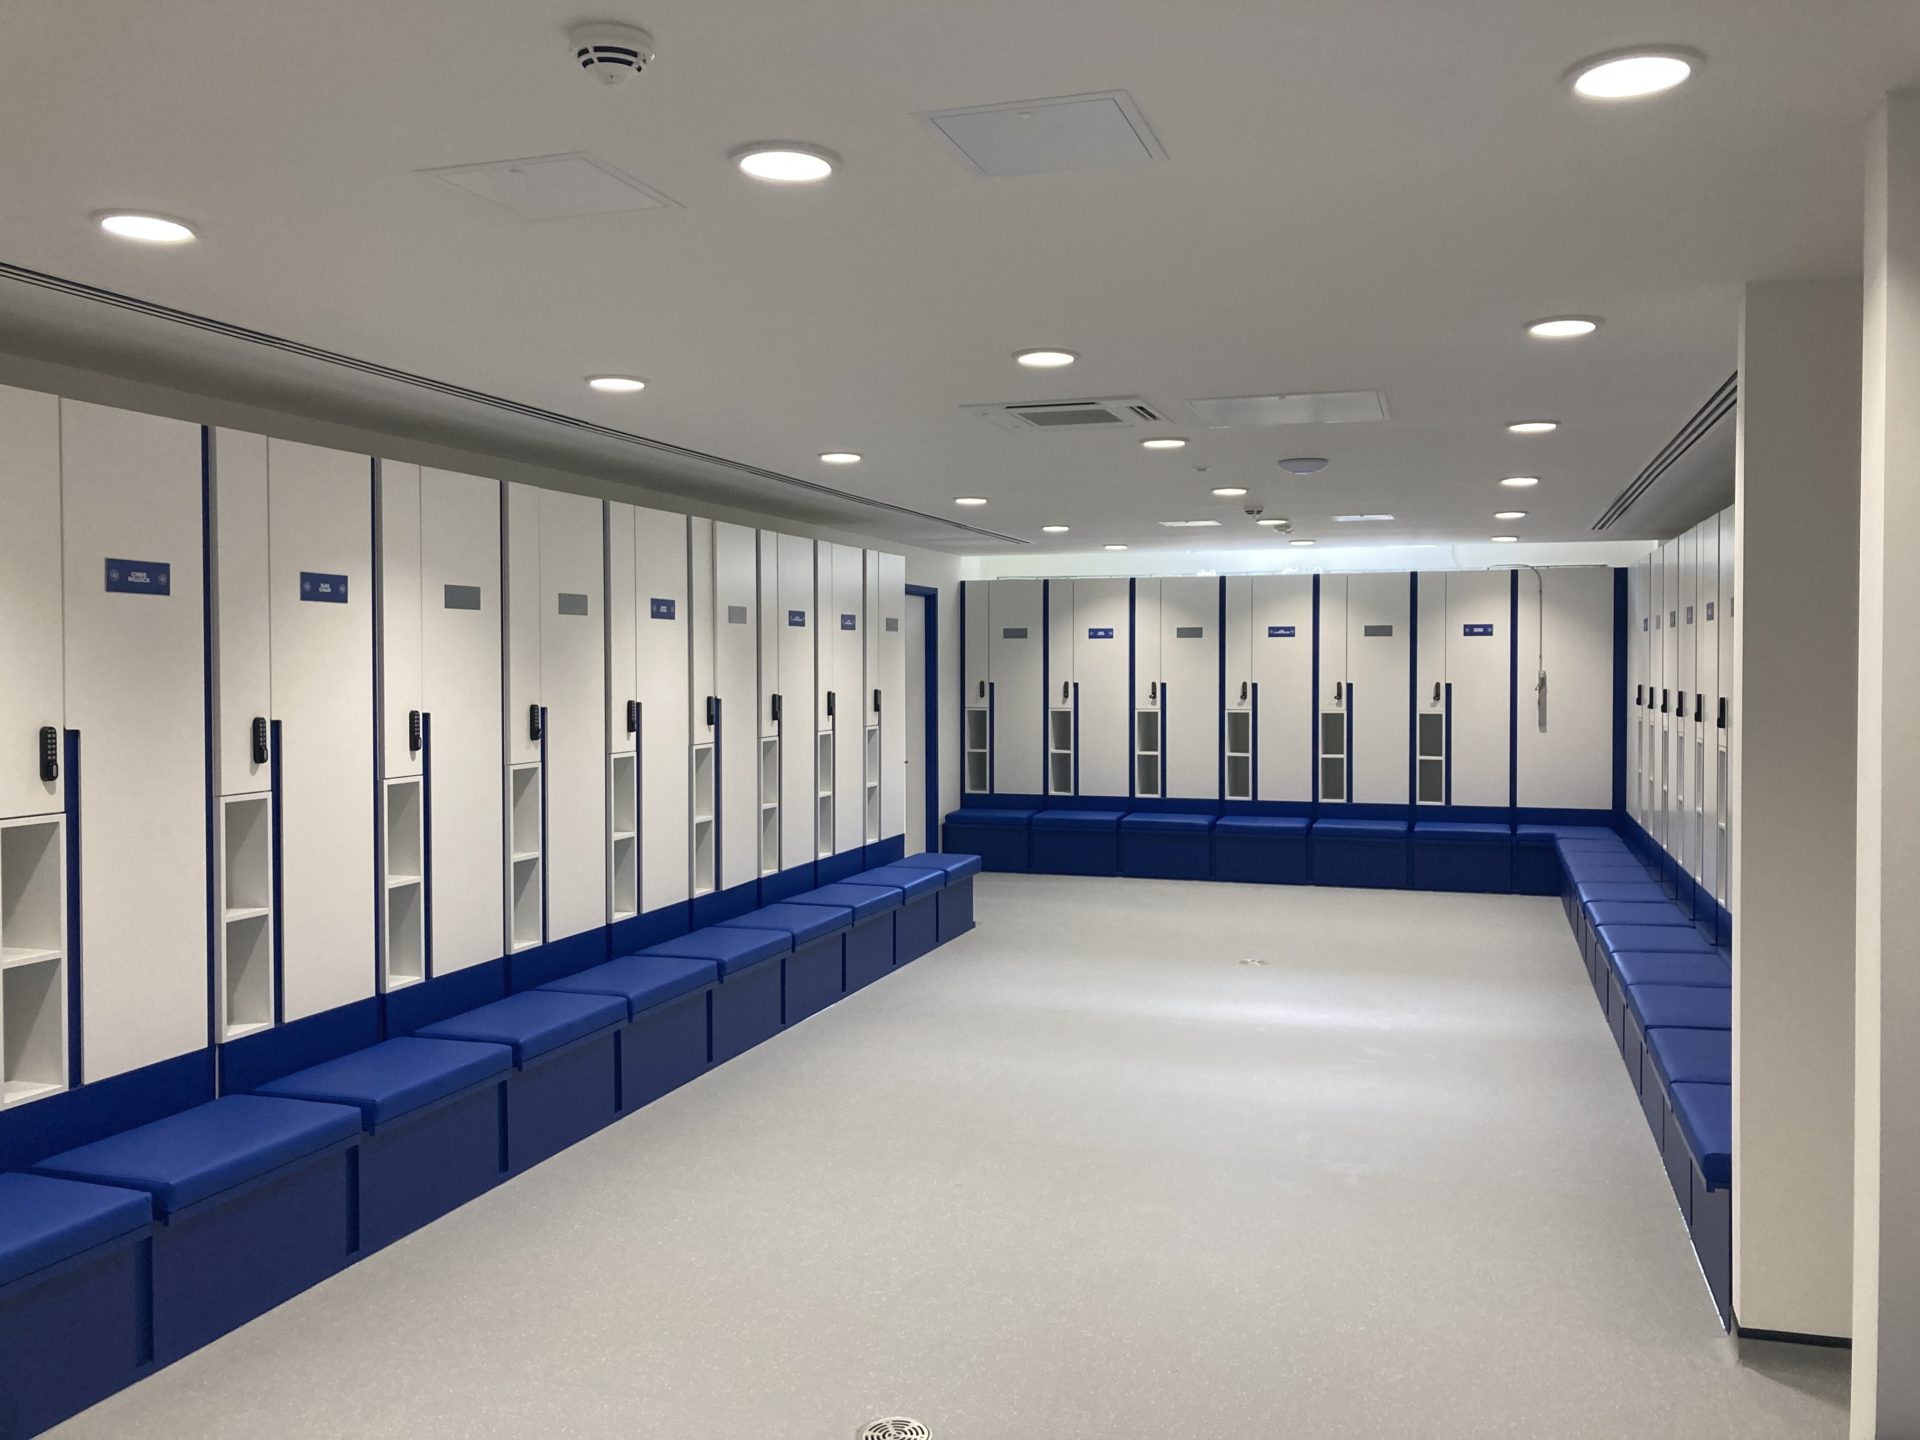 A room with white lockers and blue seats.